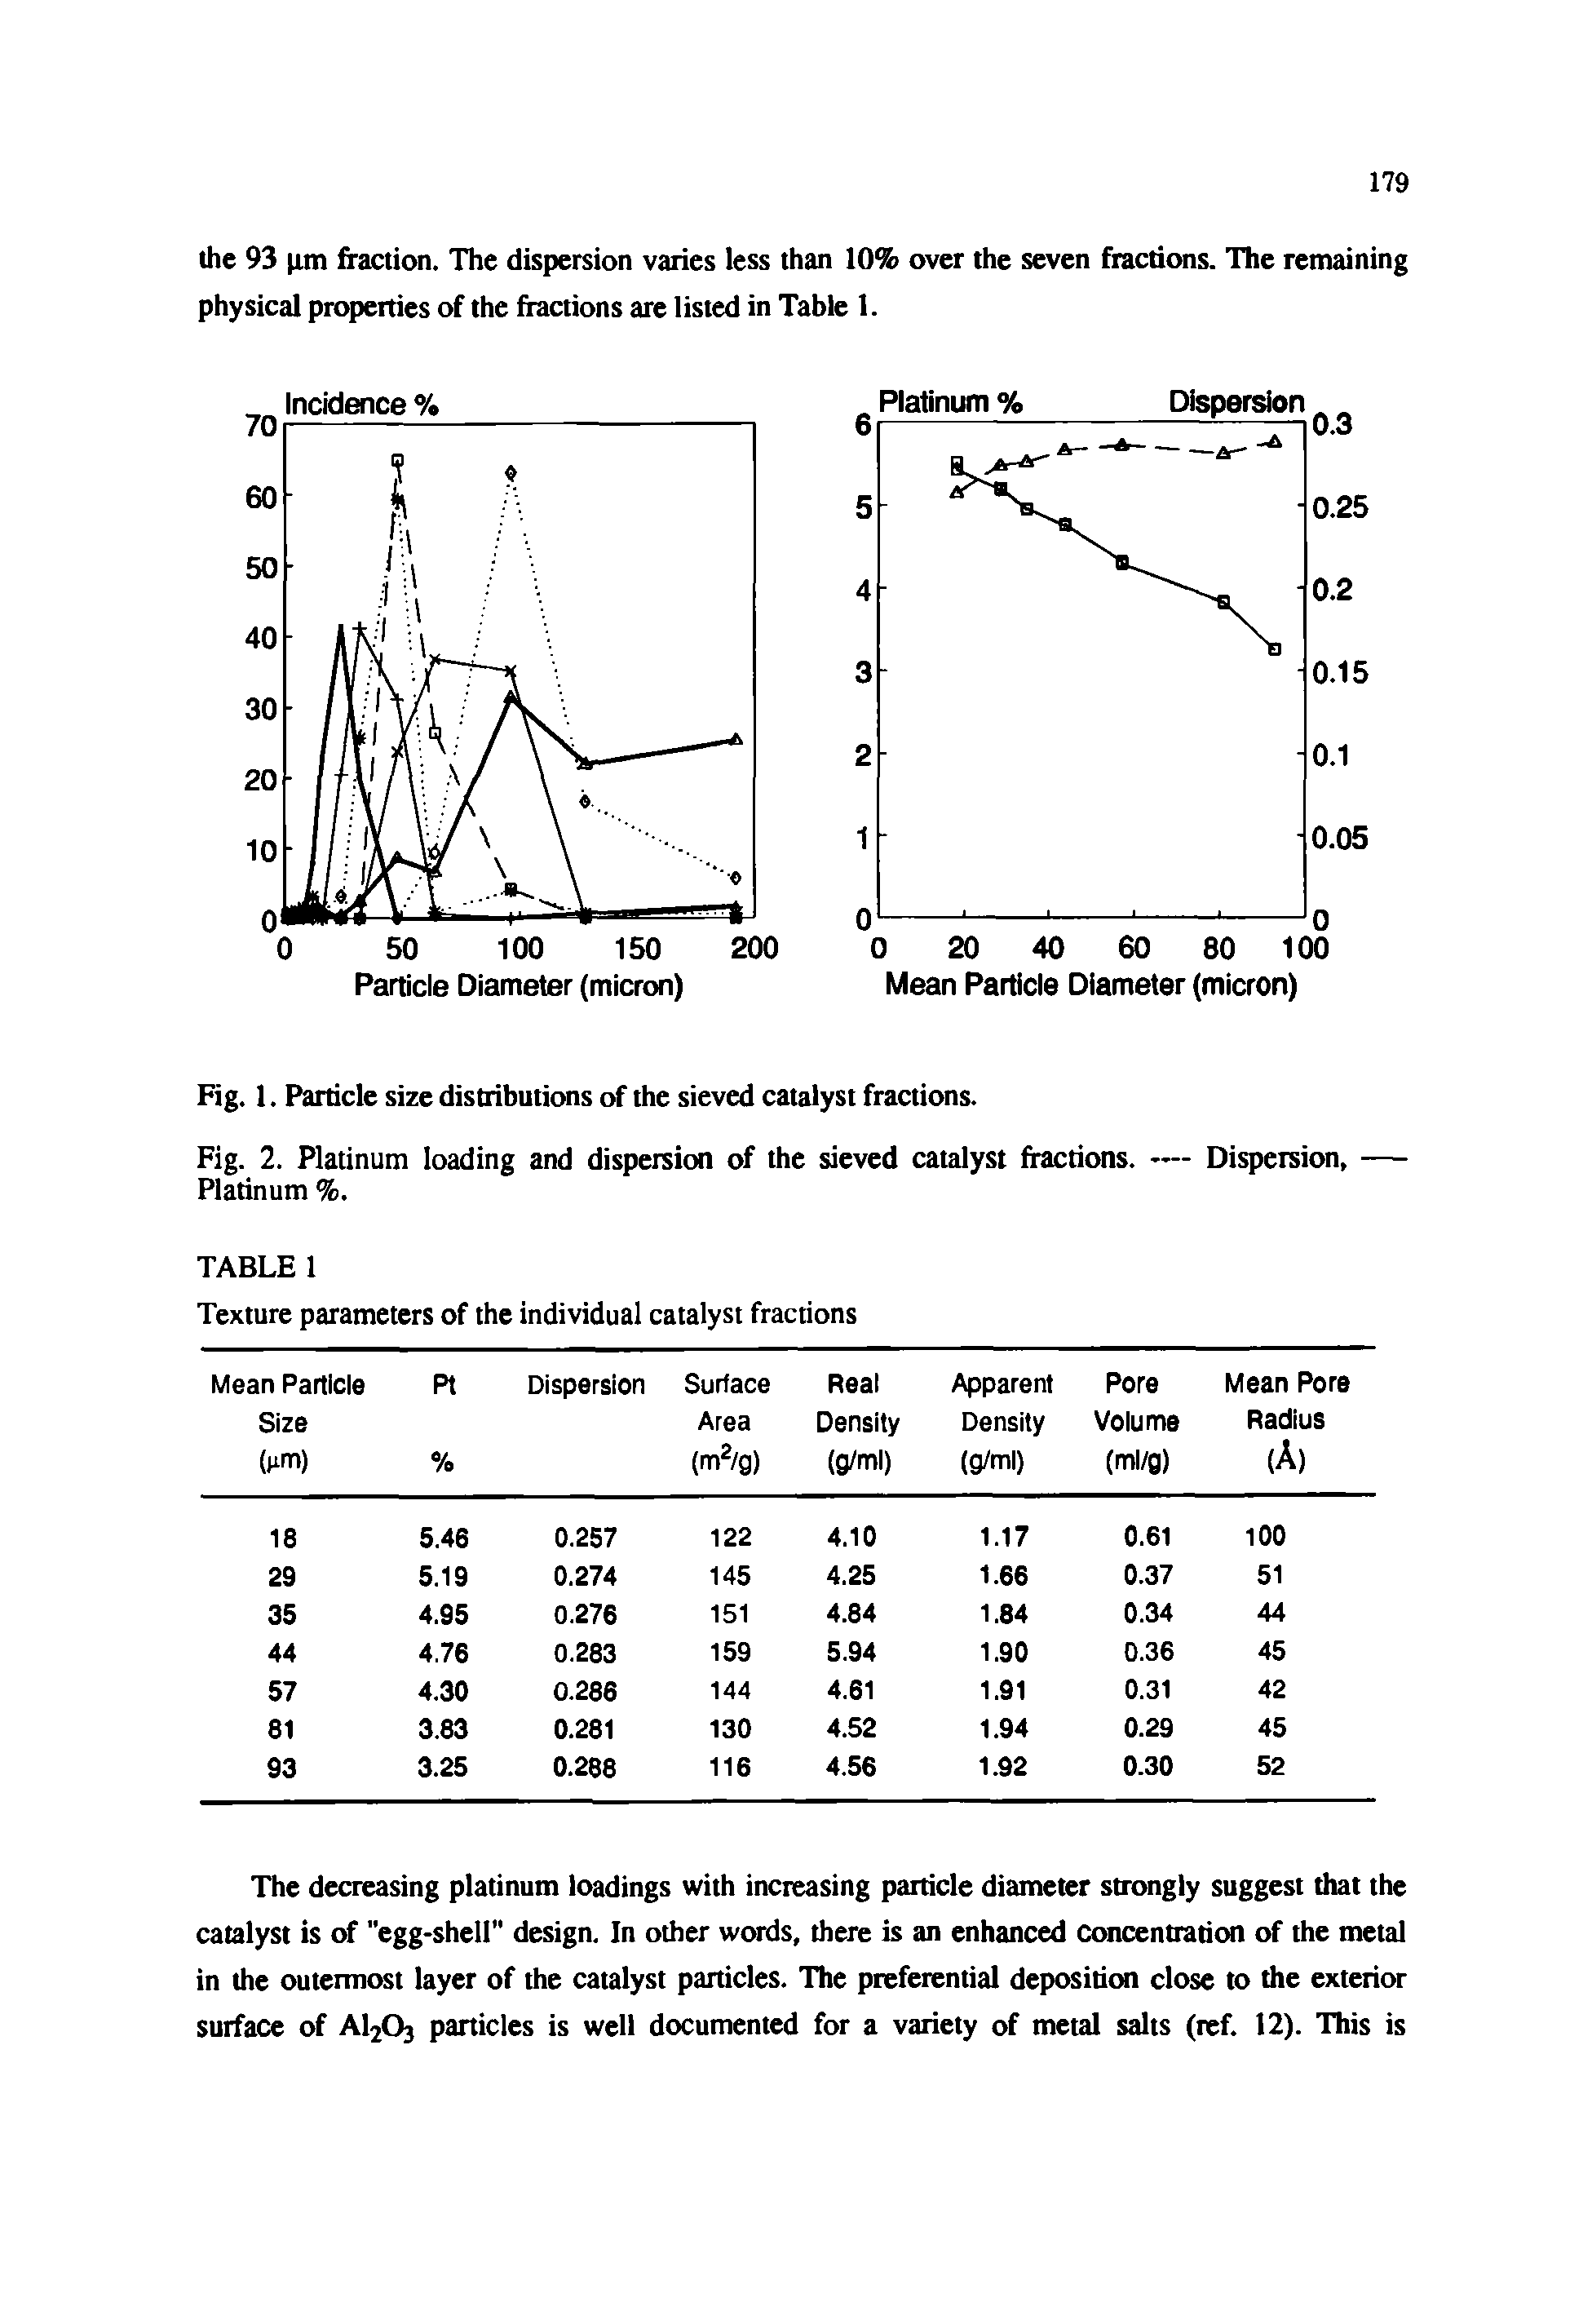 Fig. 1. Particle size distributions of the sieved catalyst fractions.